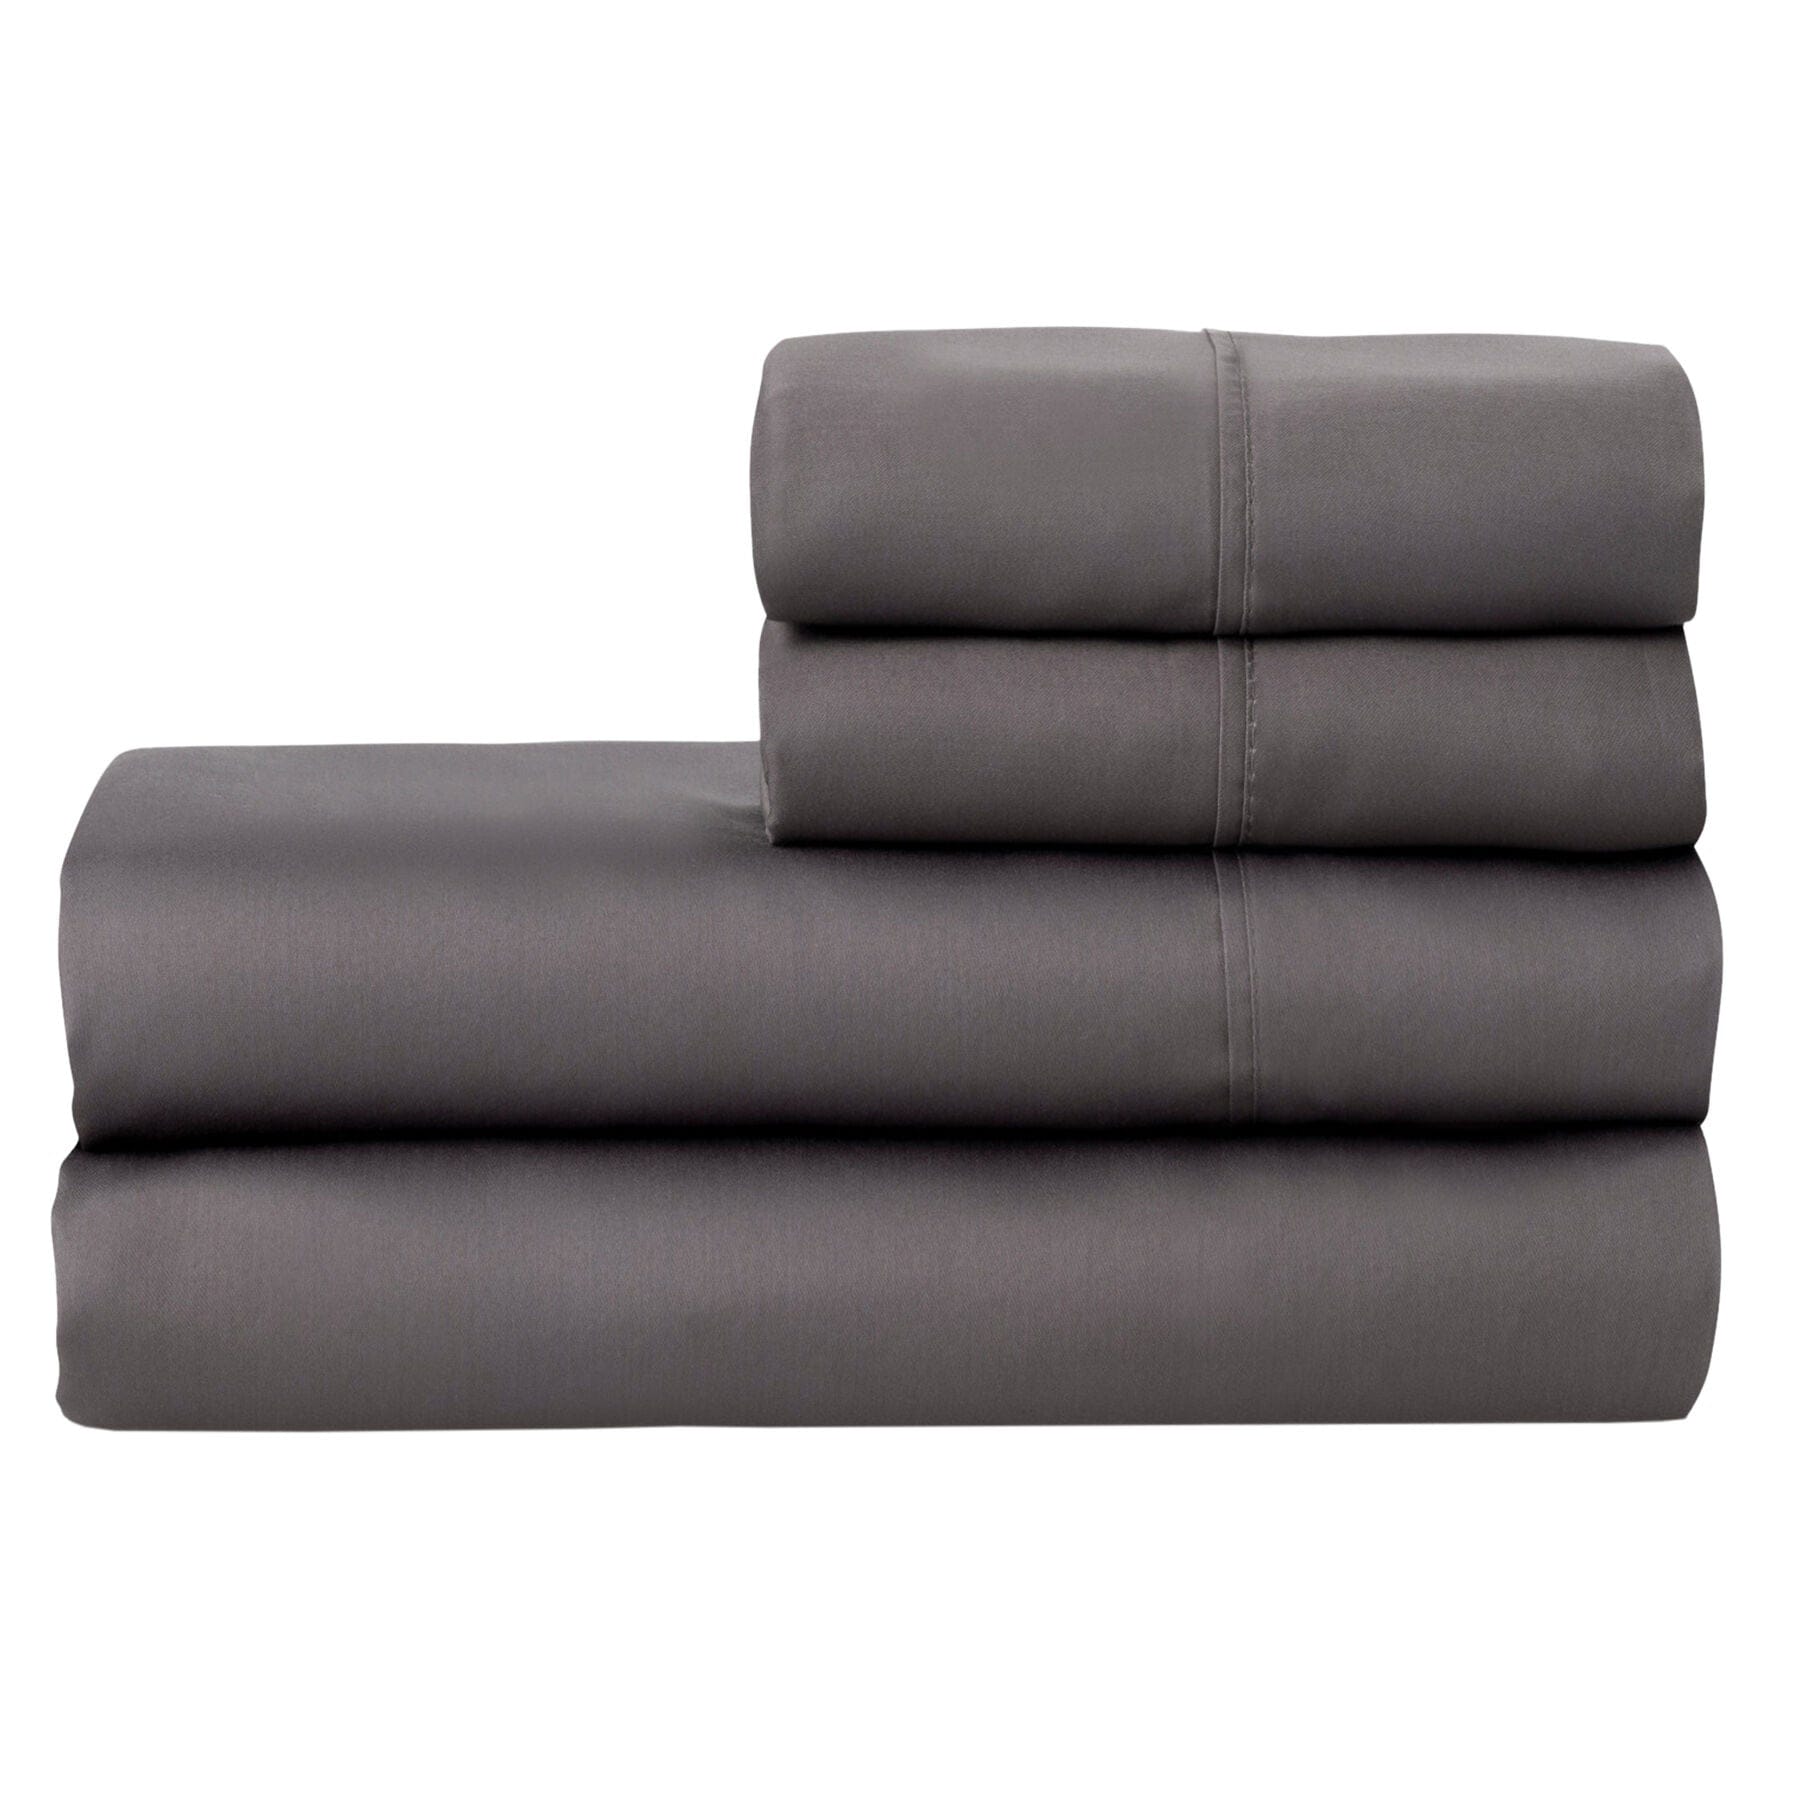 4-Piece Charcoal Grey 500 Thread Count Blended Sheet Set, Queen - nybusiness